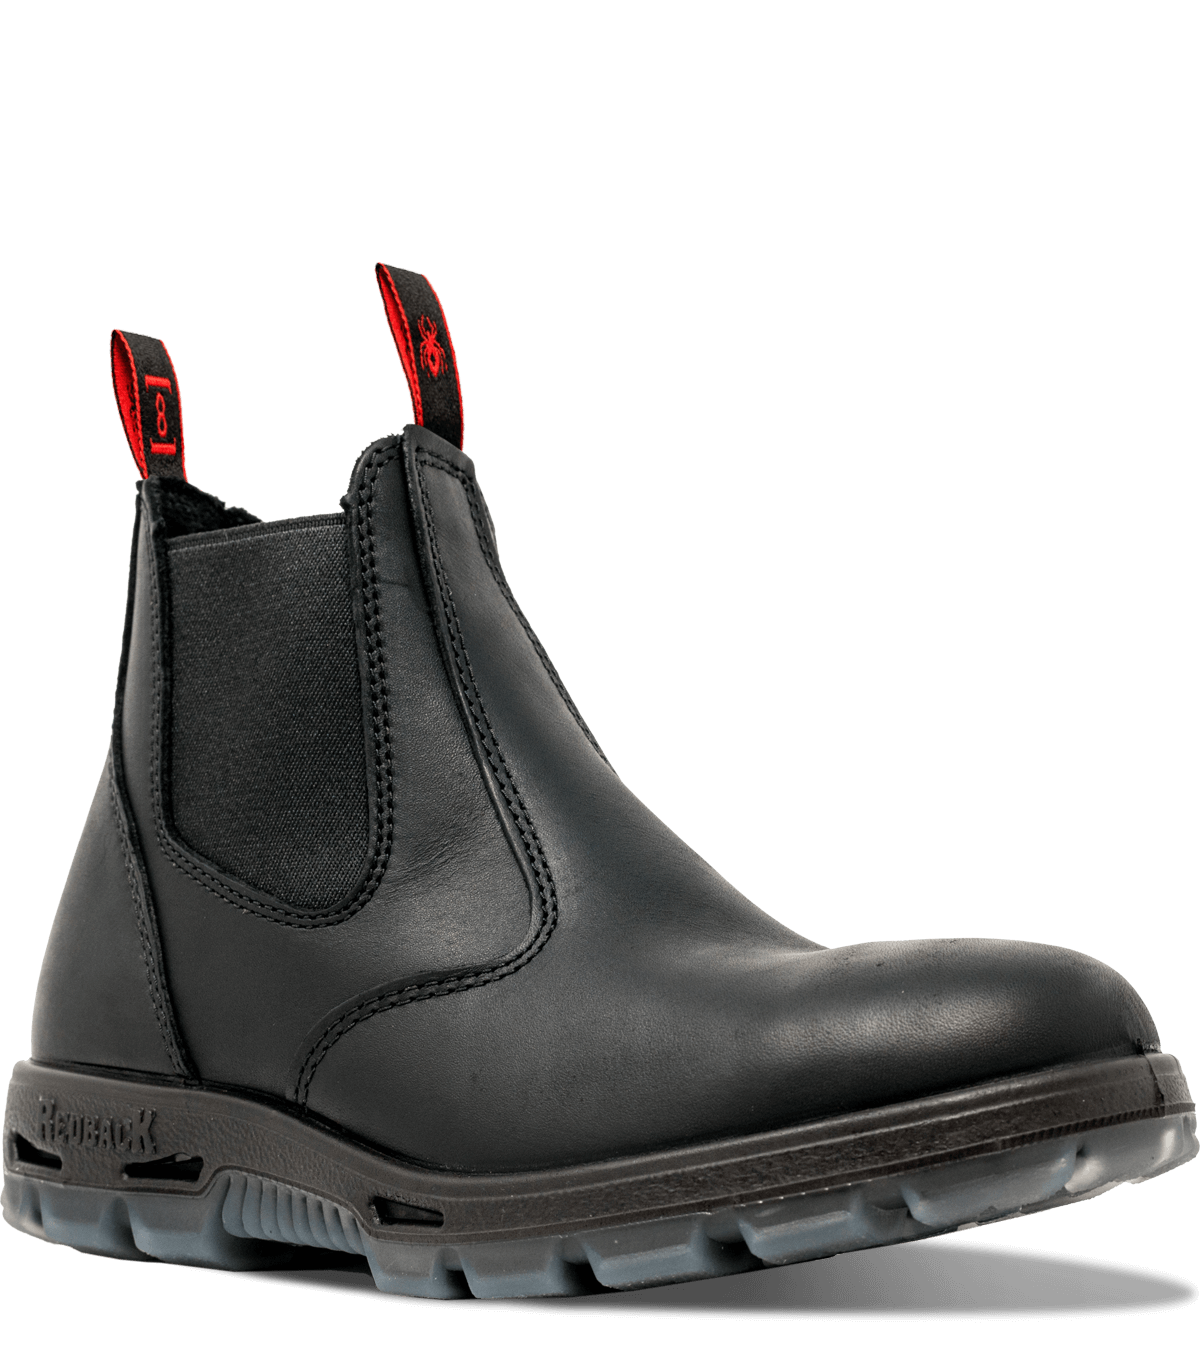 Redback Easy Escape Station Boots UBBK (Soft Toe) | The Fire Center | Firefighter boots, firefighter boot, fireman boot, fire boots, fire fighter boots, firefighting boots, fire station boots, firefighter duty boots, fire boot, firemen boots, fire boots near me, firefighter station boots, firefighters uniforms, fireman uniforms, firefighter gear 